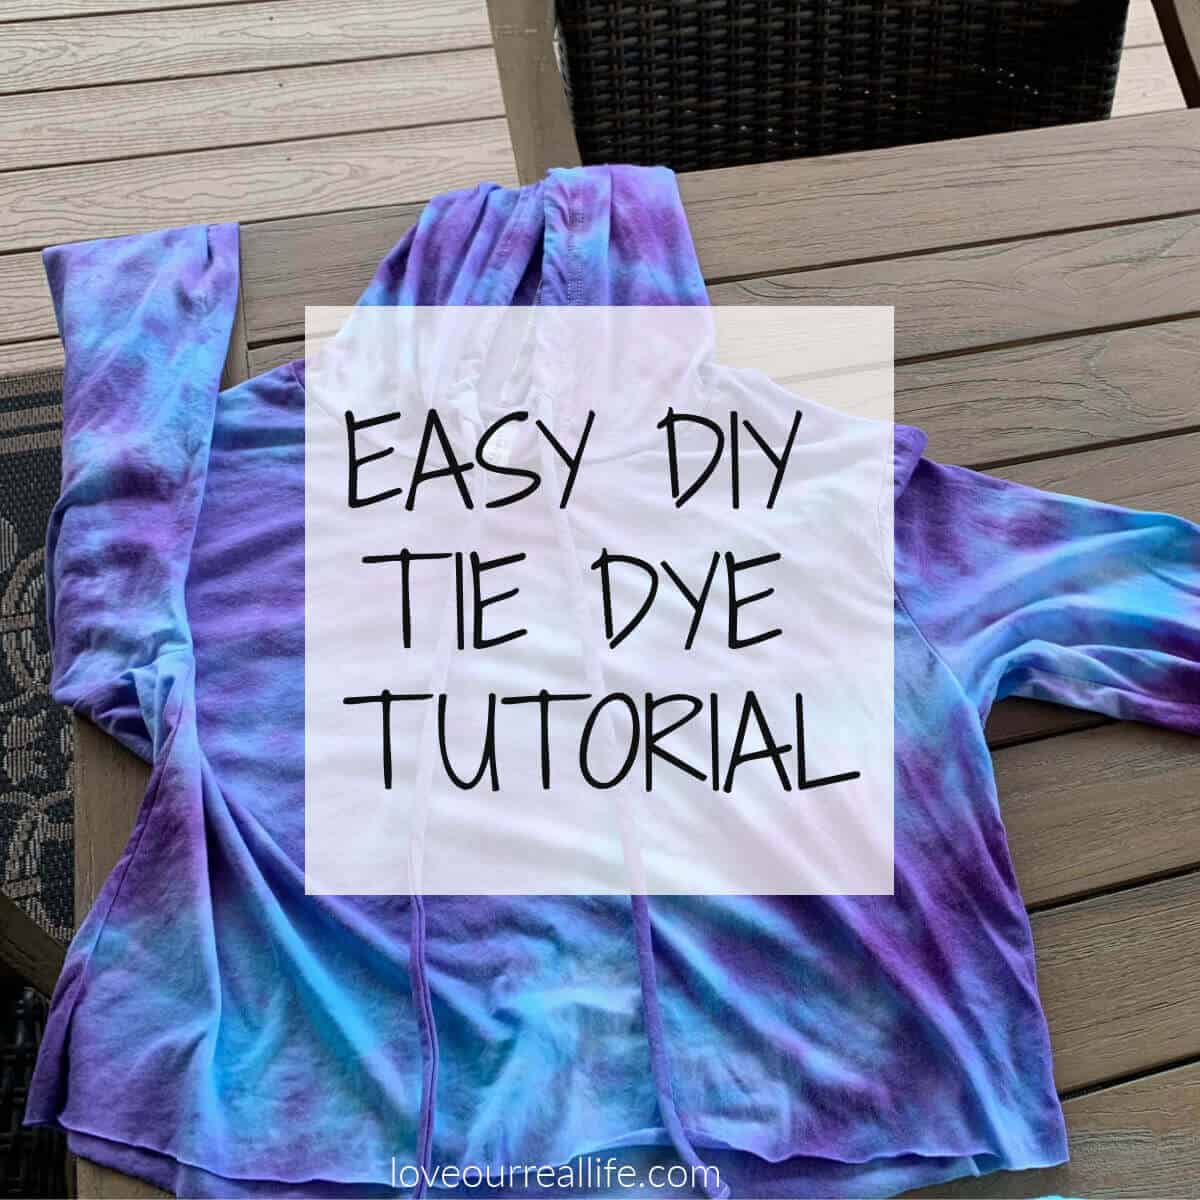 tie dye tutorial image with text overlay